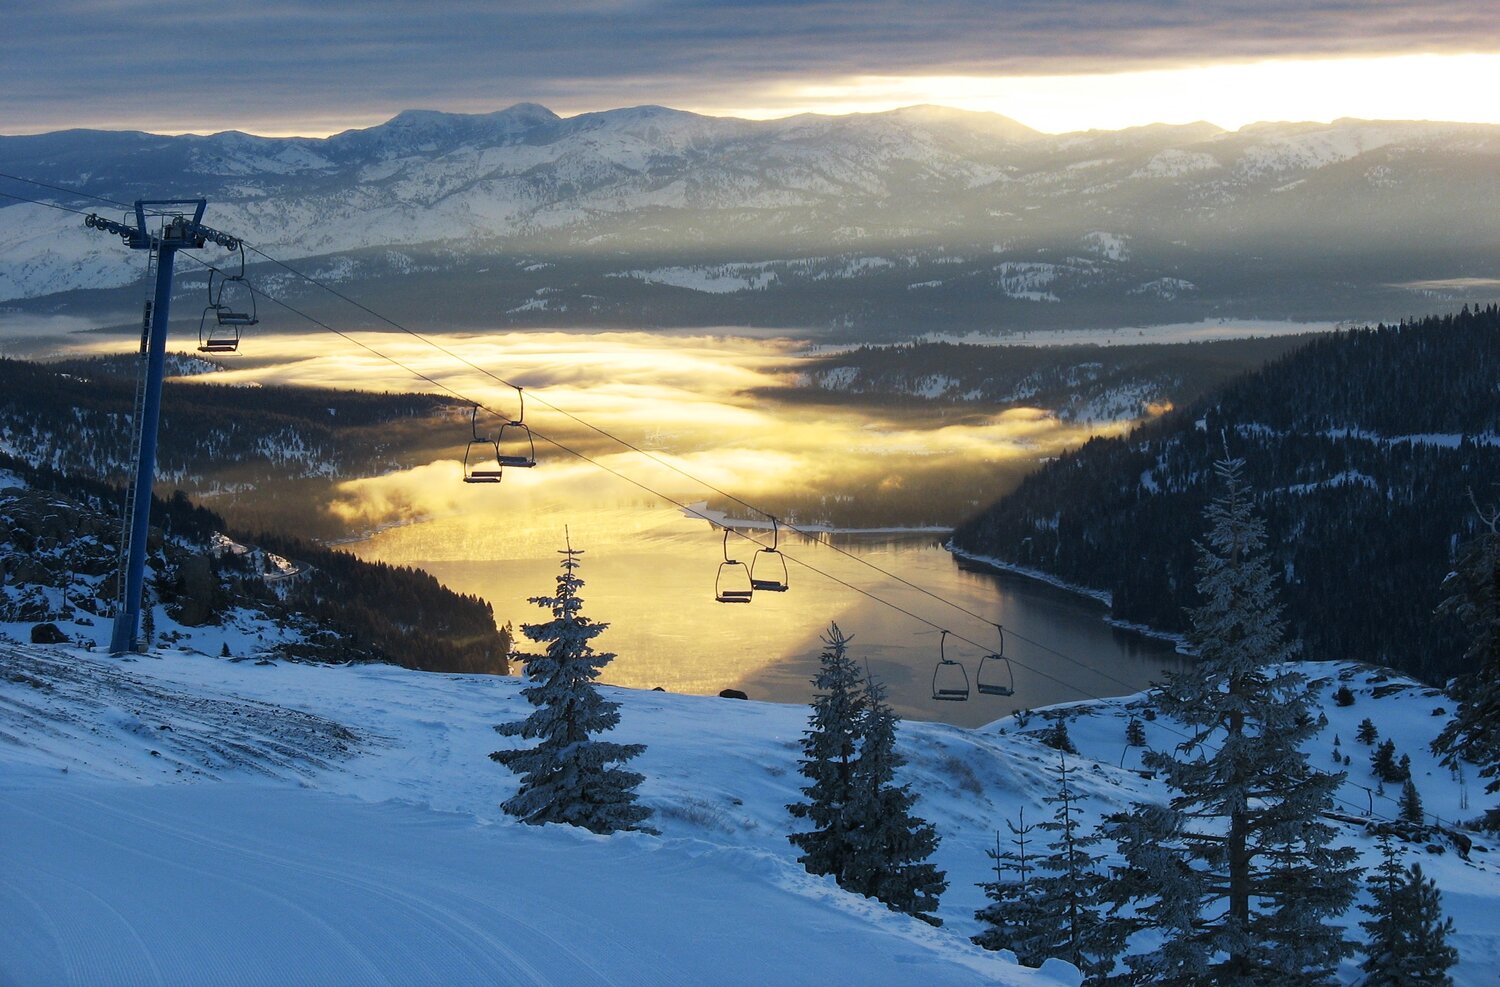 A lift at Donner Ski Ranch overlooking Donner Lake.